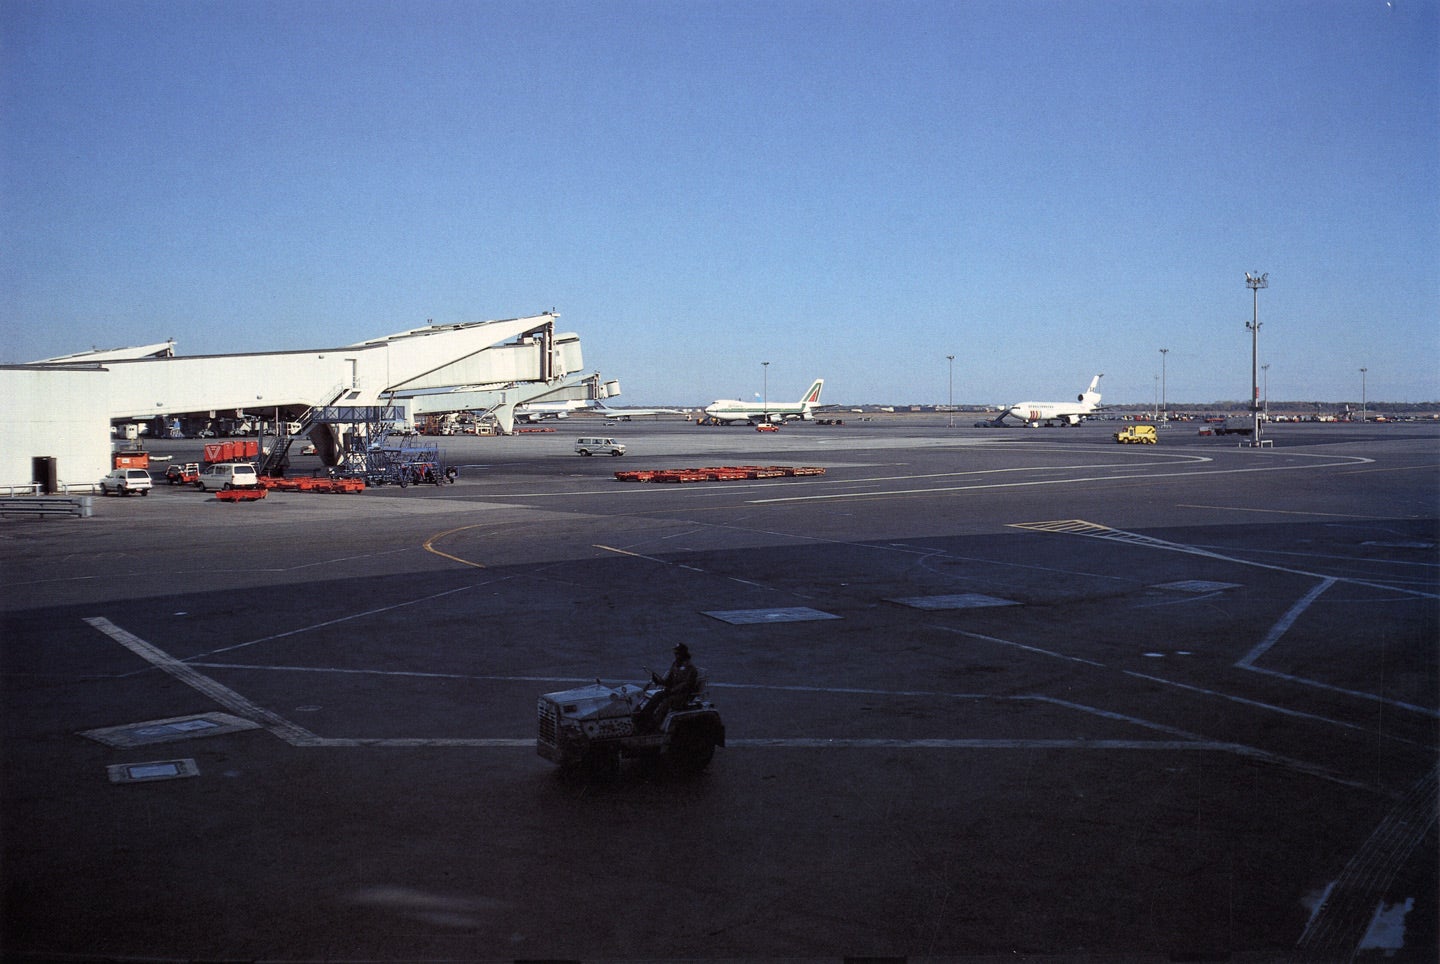 Peter Fischli and David Weiss: Airports